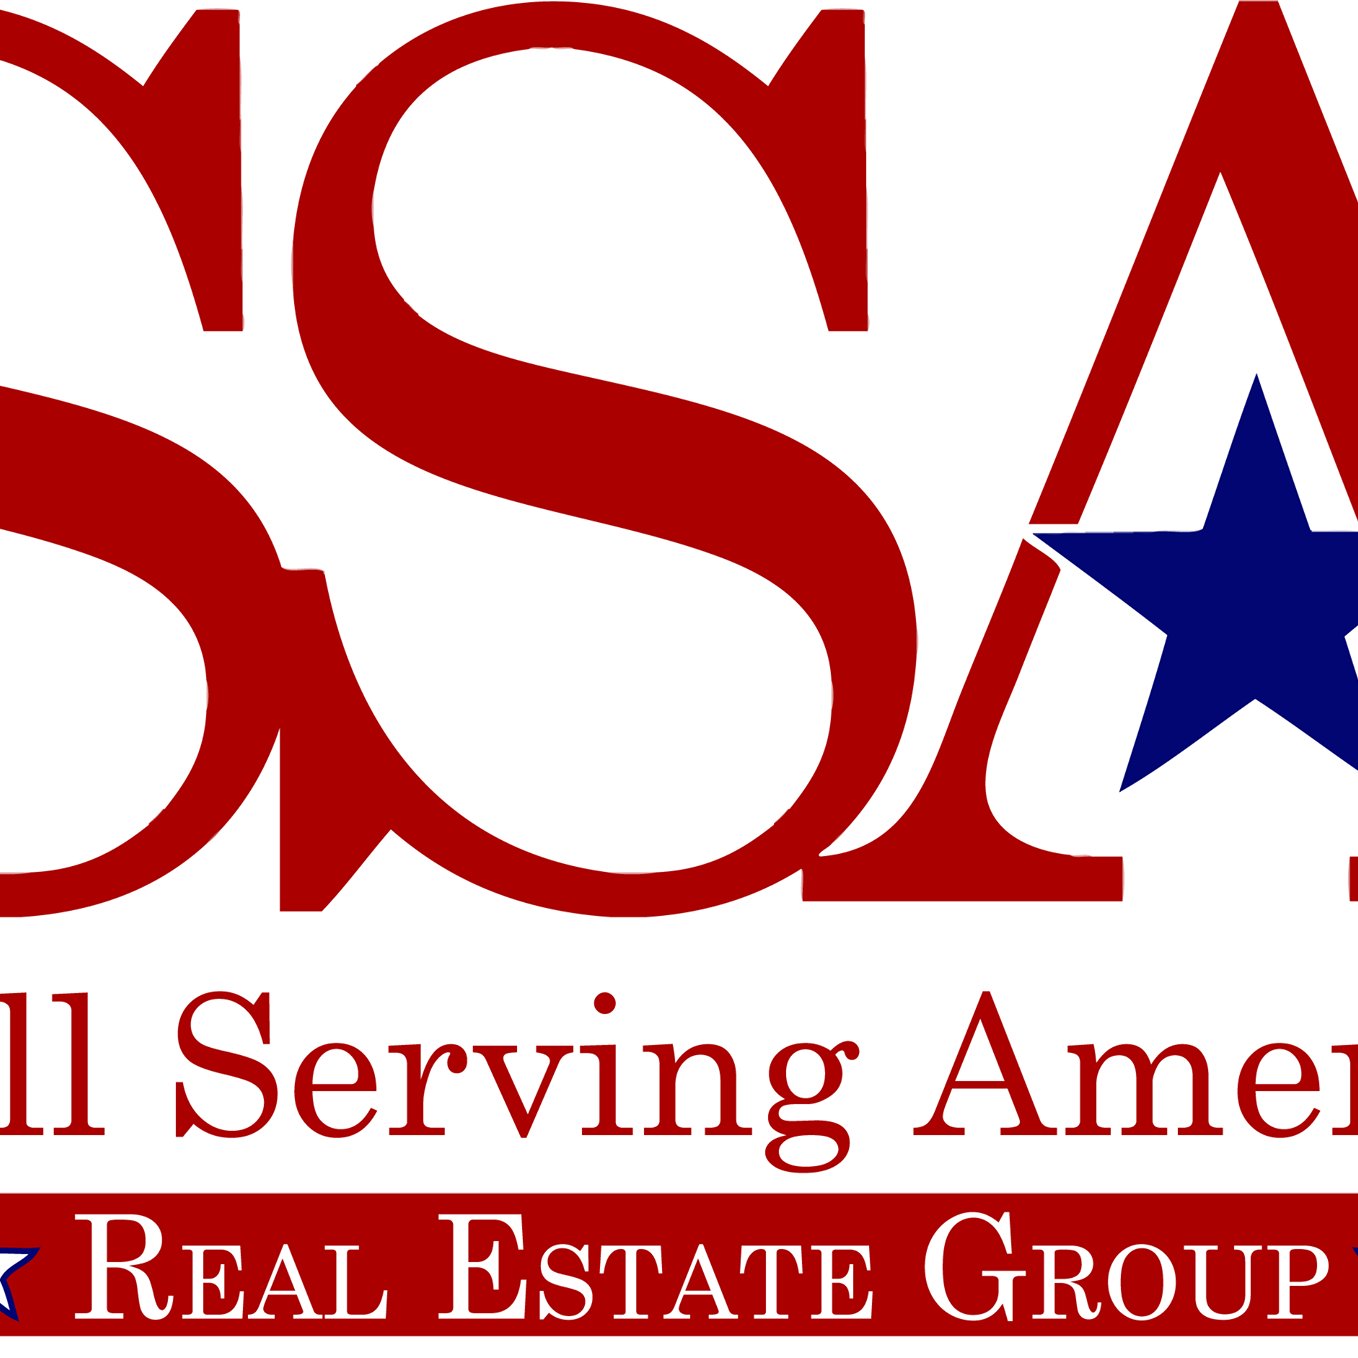 Real Estate Brokerage serving the Military, Veterans, and all of the metro Atlanta area.  We specialize in Residential and Commercial properties.